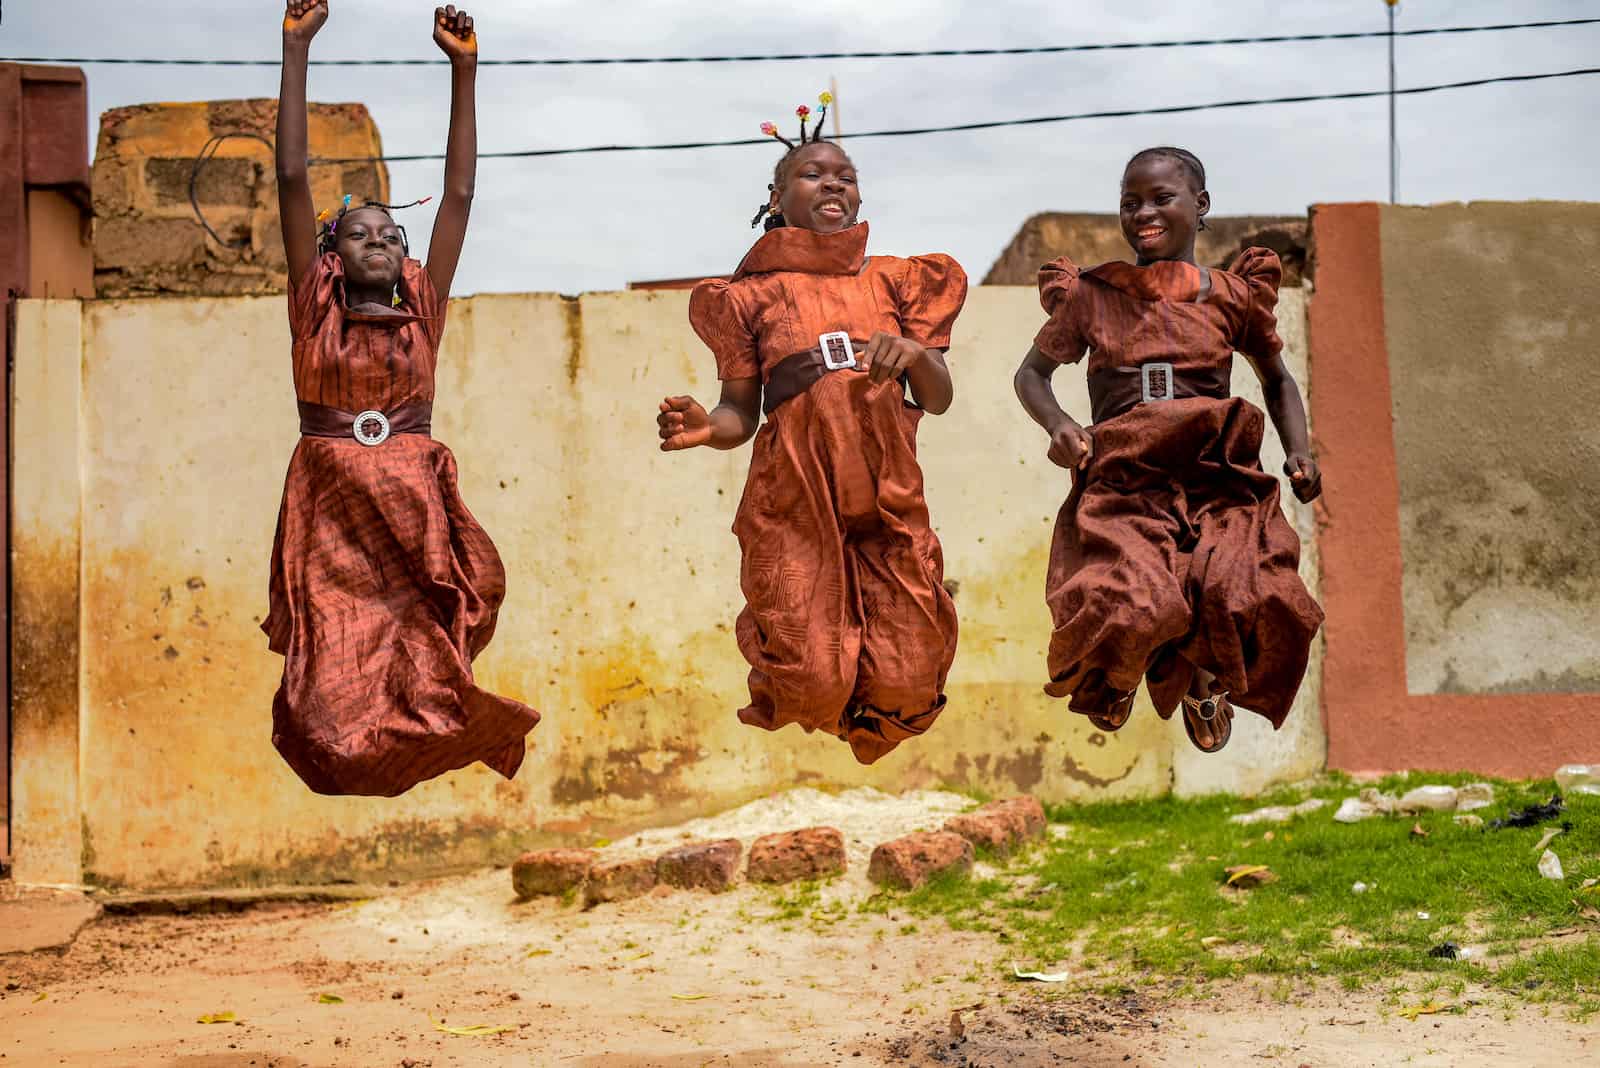 Three girls wearing brown dresses jump in the air, smiling.